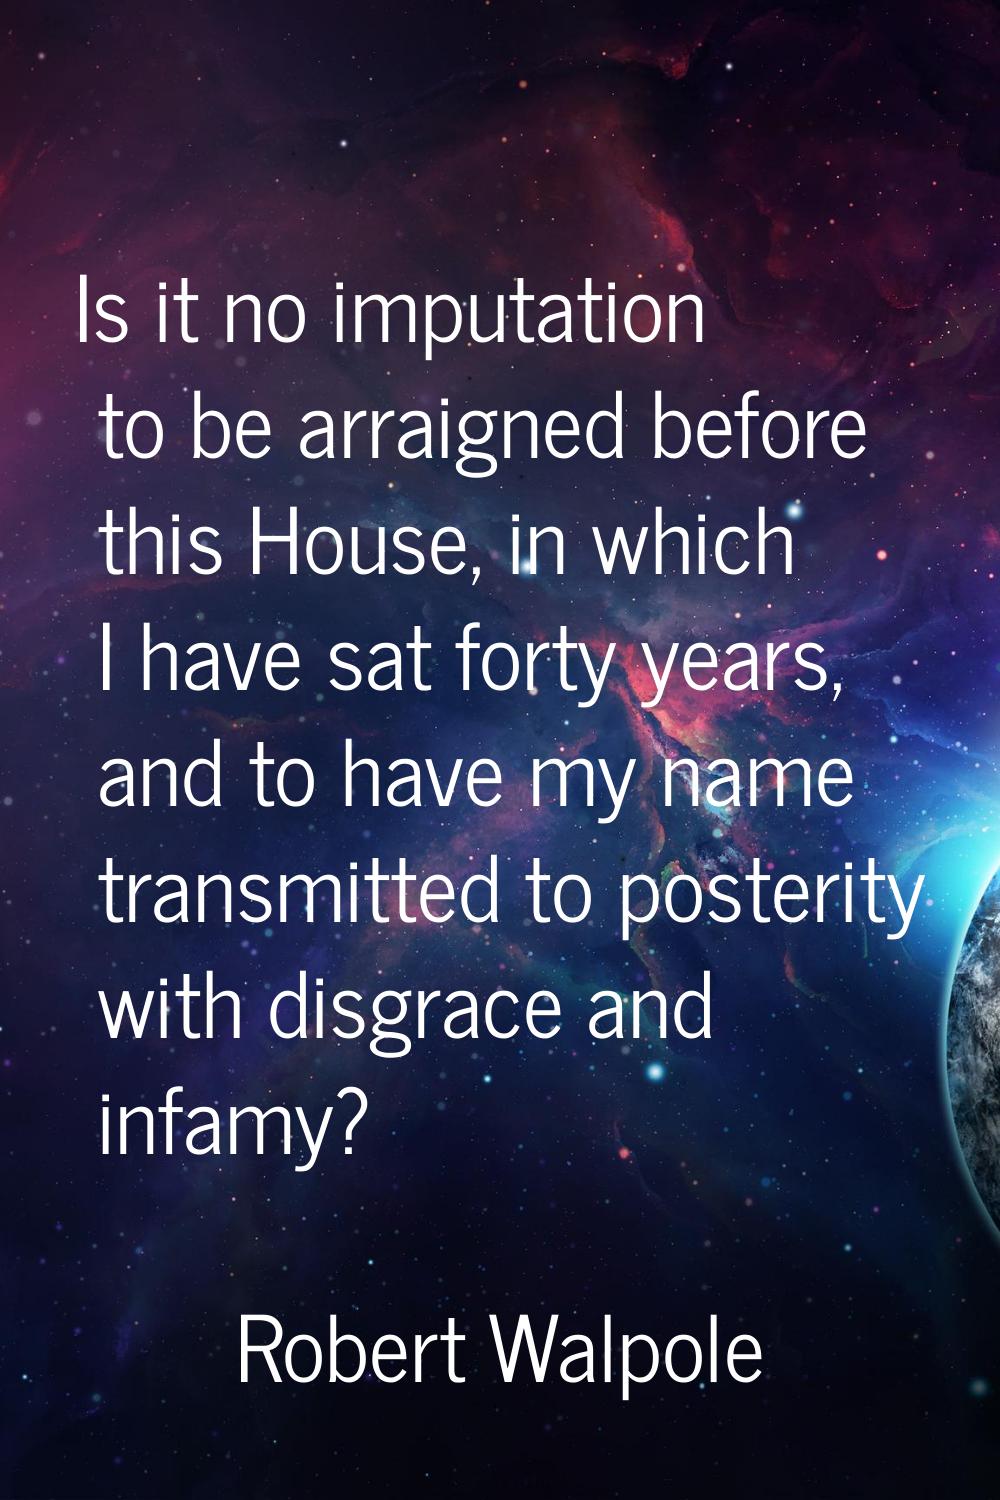 Is it no imputation to be arraigned before this House, in which I have sat forty years, and to have